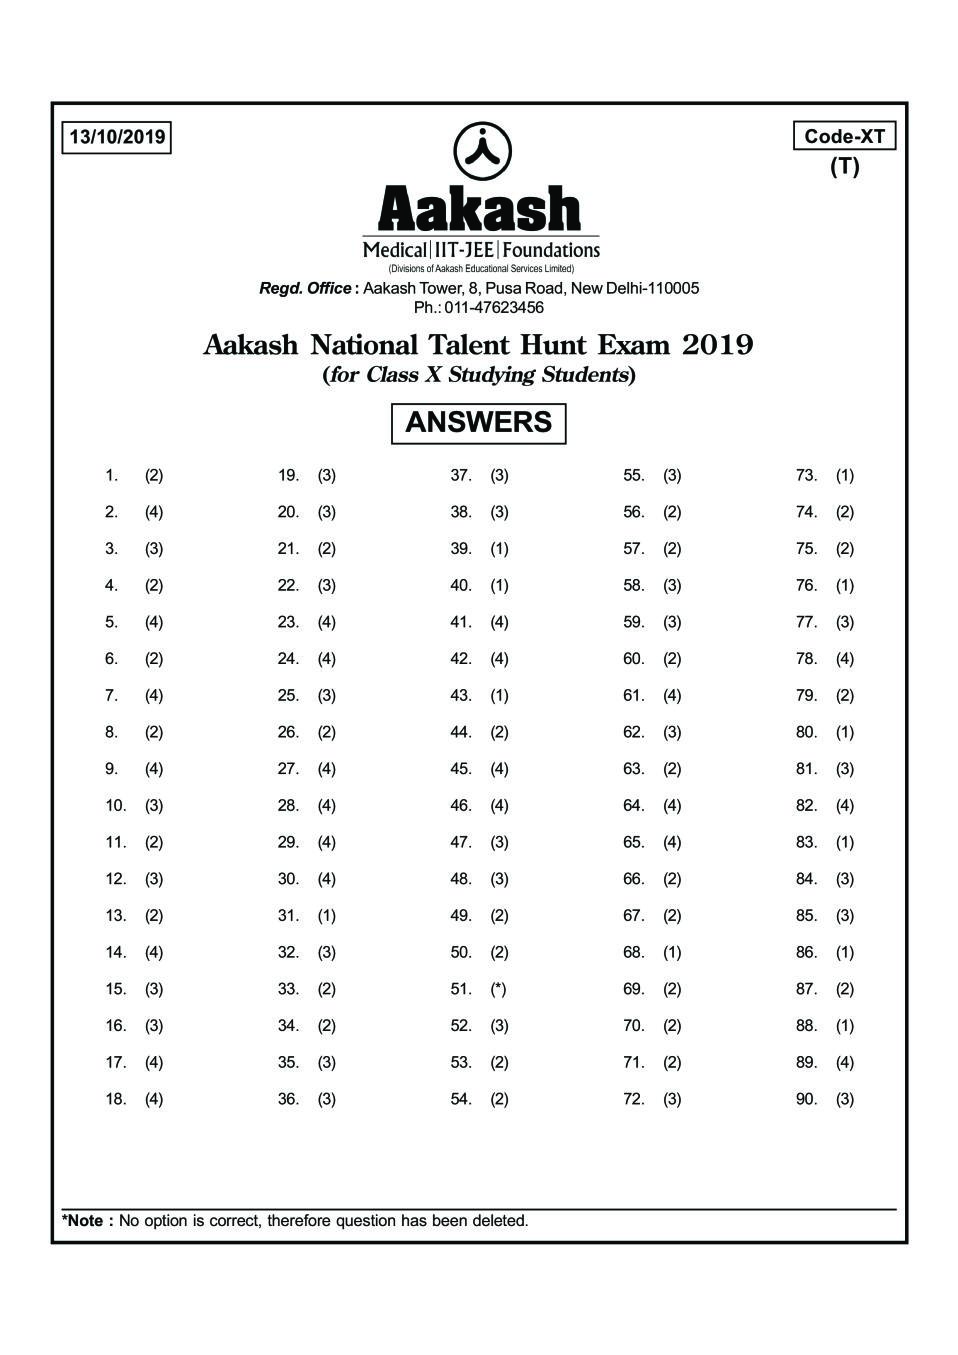 ANTHE 2019 Class 10 Answer Key (Foundation) Code XT - Page 1